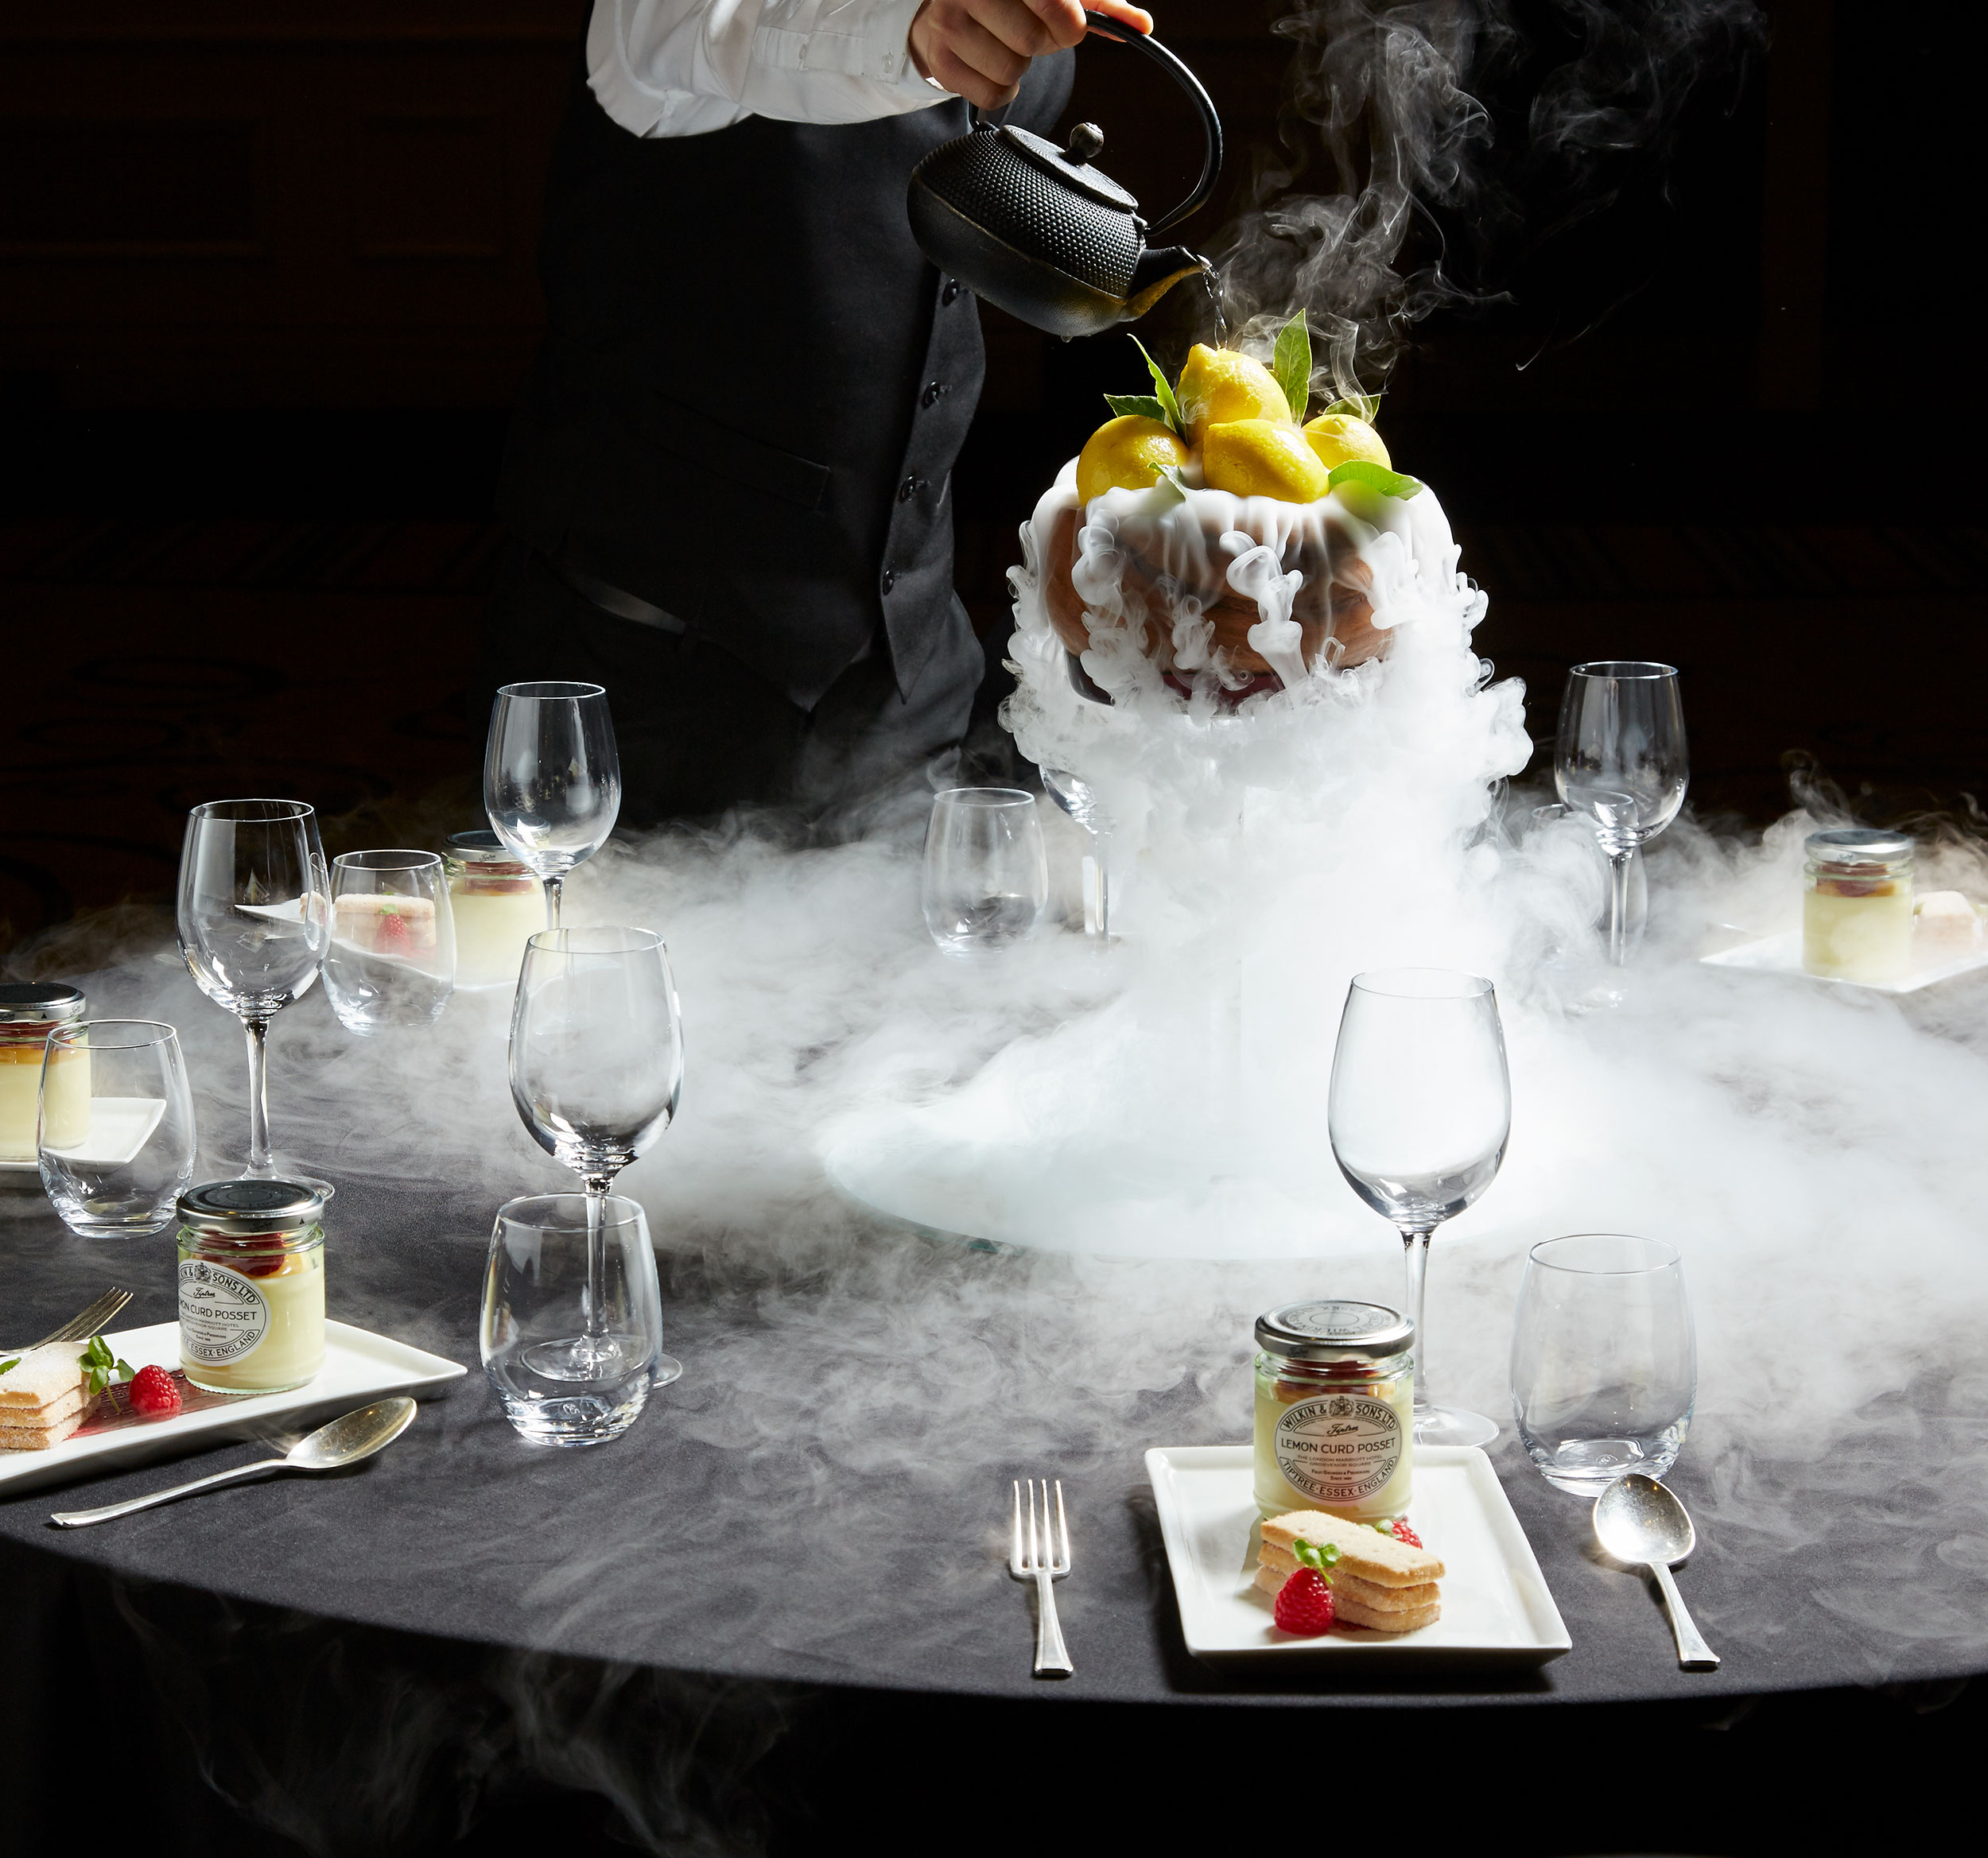 Desserts and dry ice at the London Marriott Grosvenor Square hotel.  Food photography by Mike Caldwell